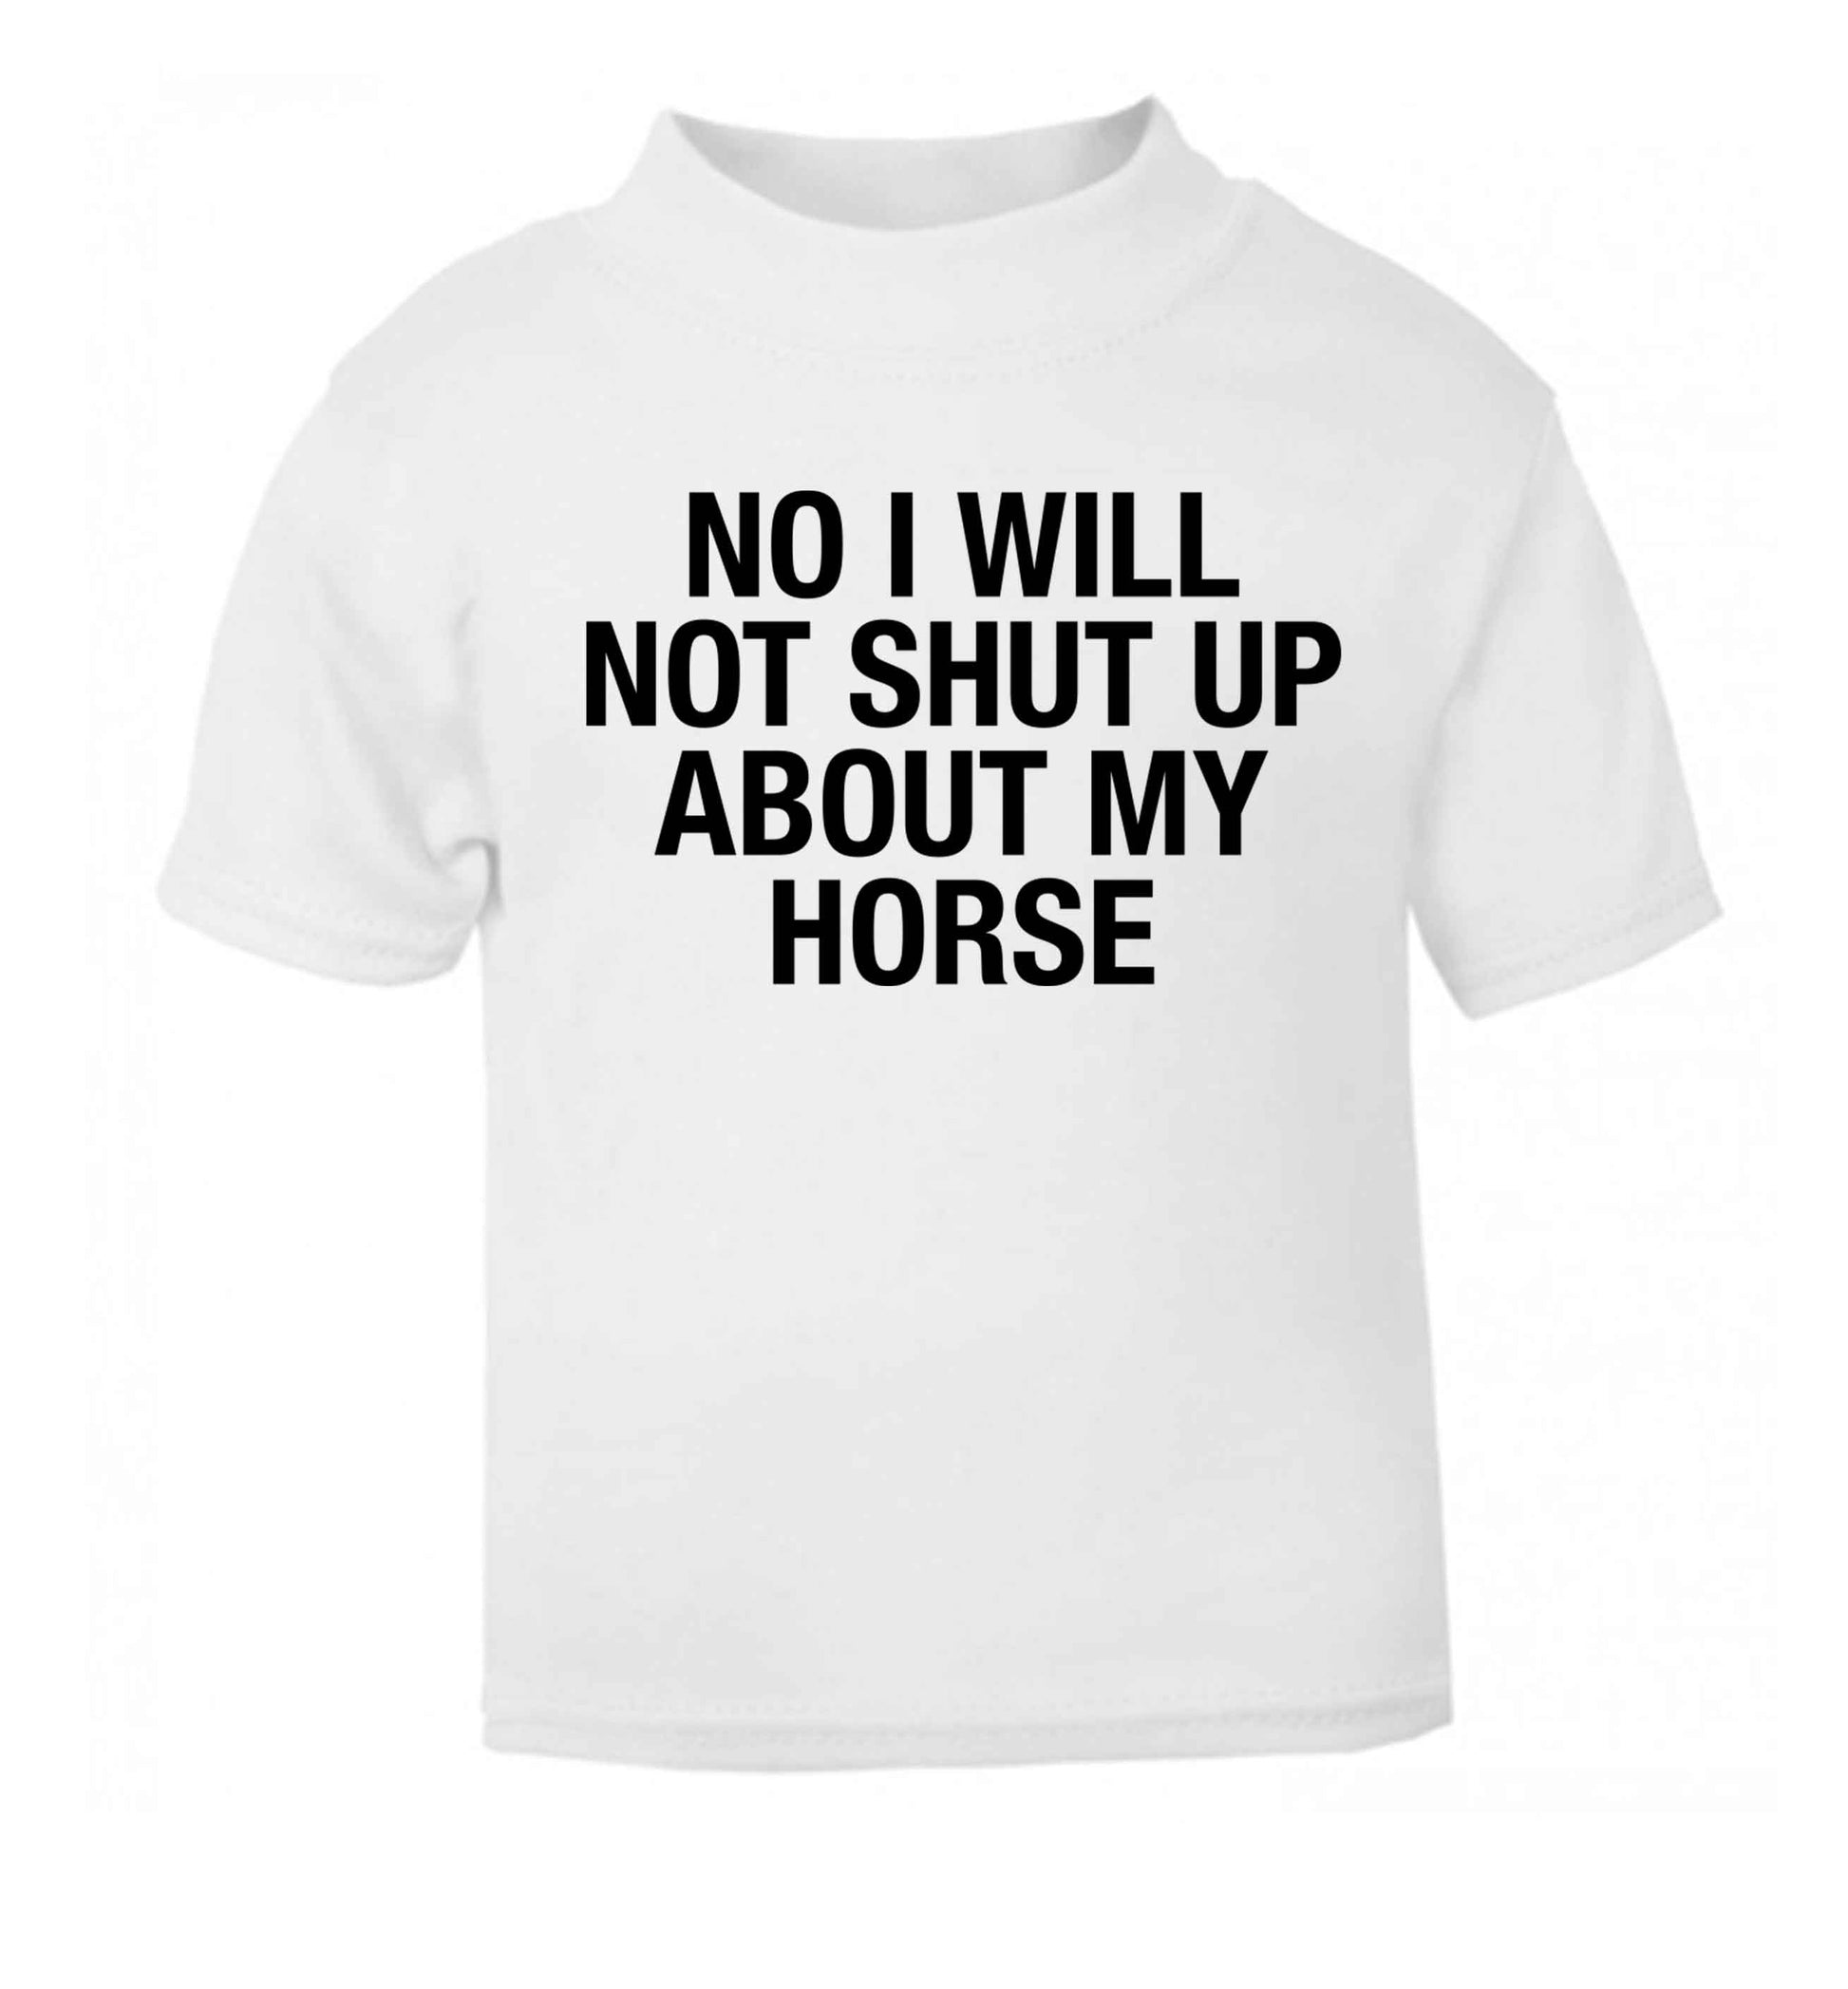 No I will not shut up talking about my horse white baby toddler Tshirt 2 Years